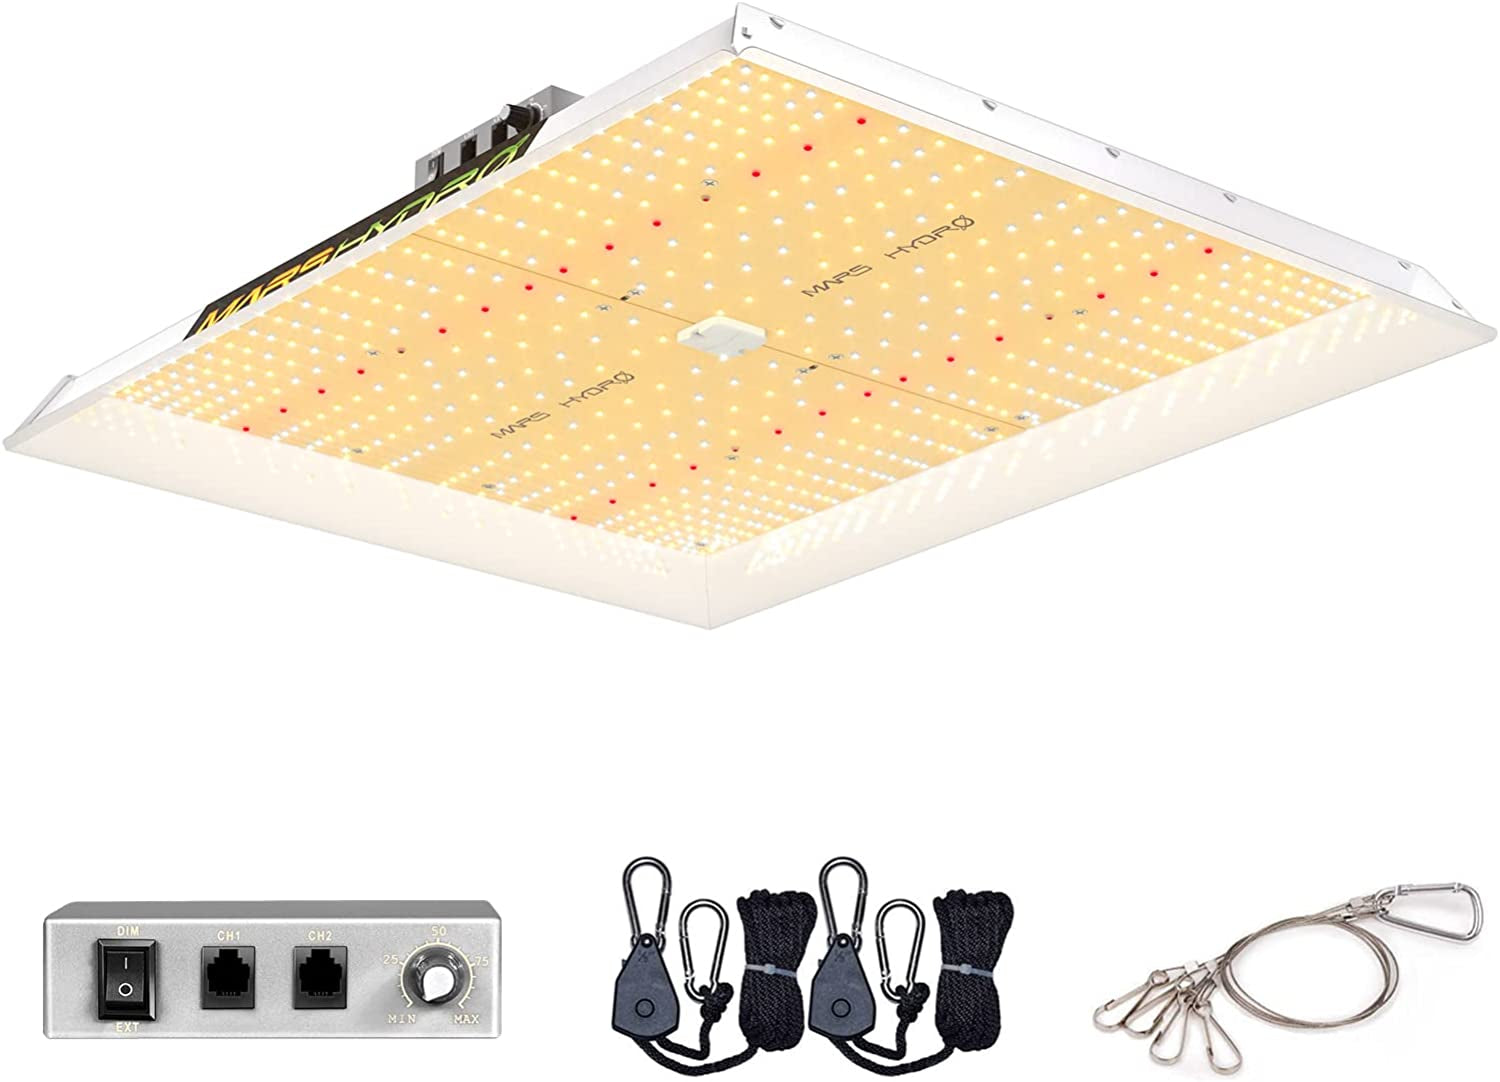 MARS HYDRO, MARS HYDRO TSW2000 Led Grow Light 300 Watt 4X4Ft Coverage Full Spectrum Growing Lamps for Indoor Plants Dimmable Daisy Chain Seeding Veg Bloom Light for Hydroponics Greenhouse Indoor LED Grow